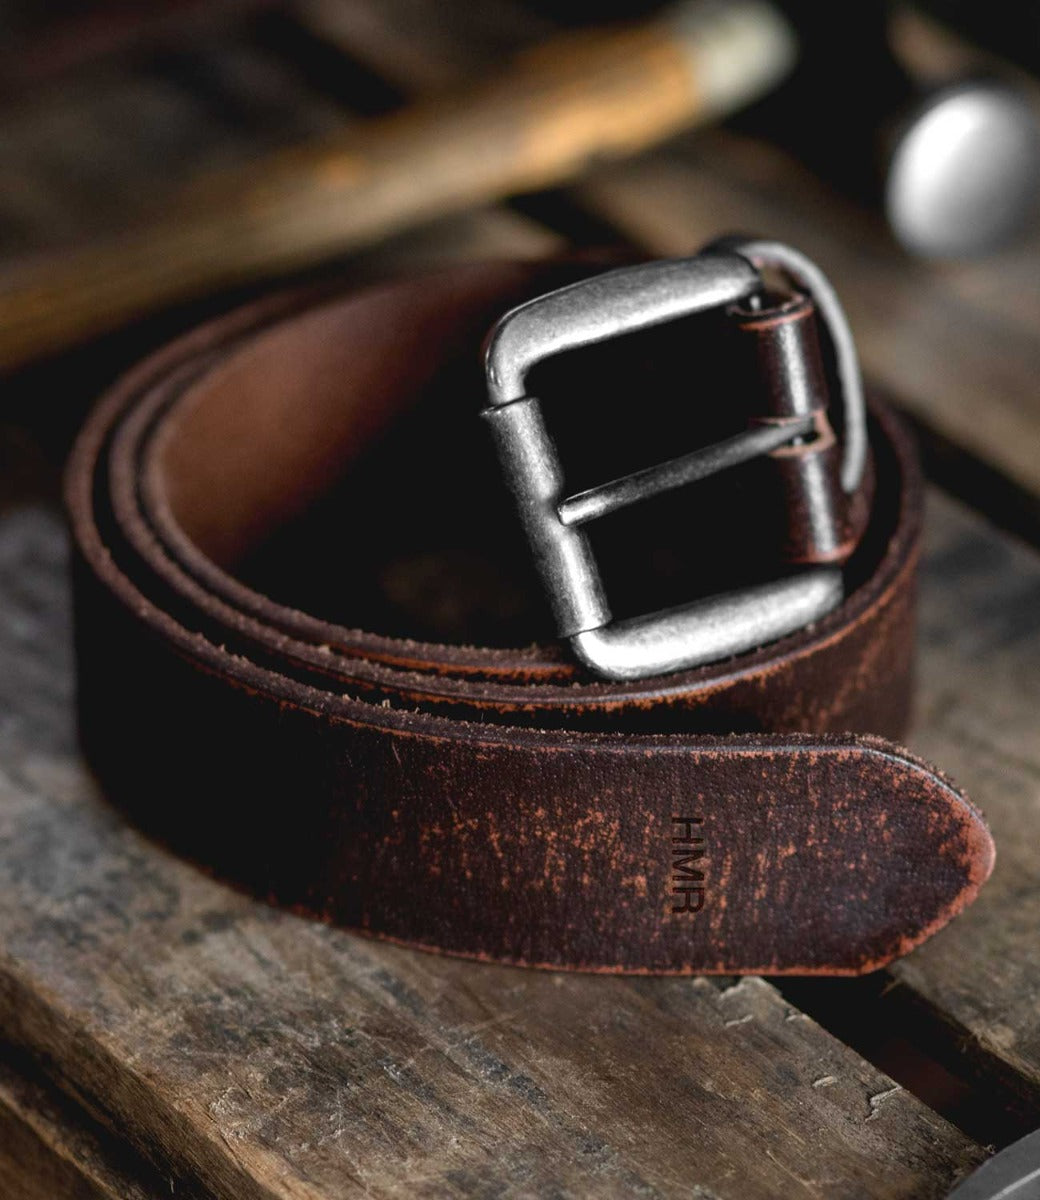 A Drifter brown leather belt by Bed Stu on a wooden table.